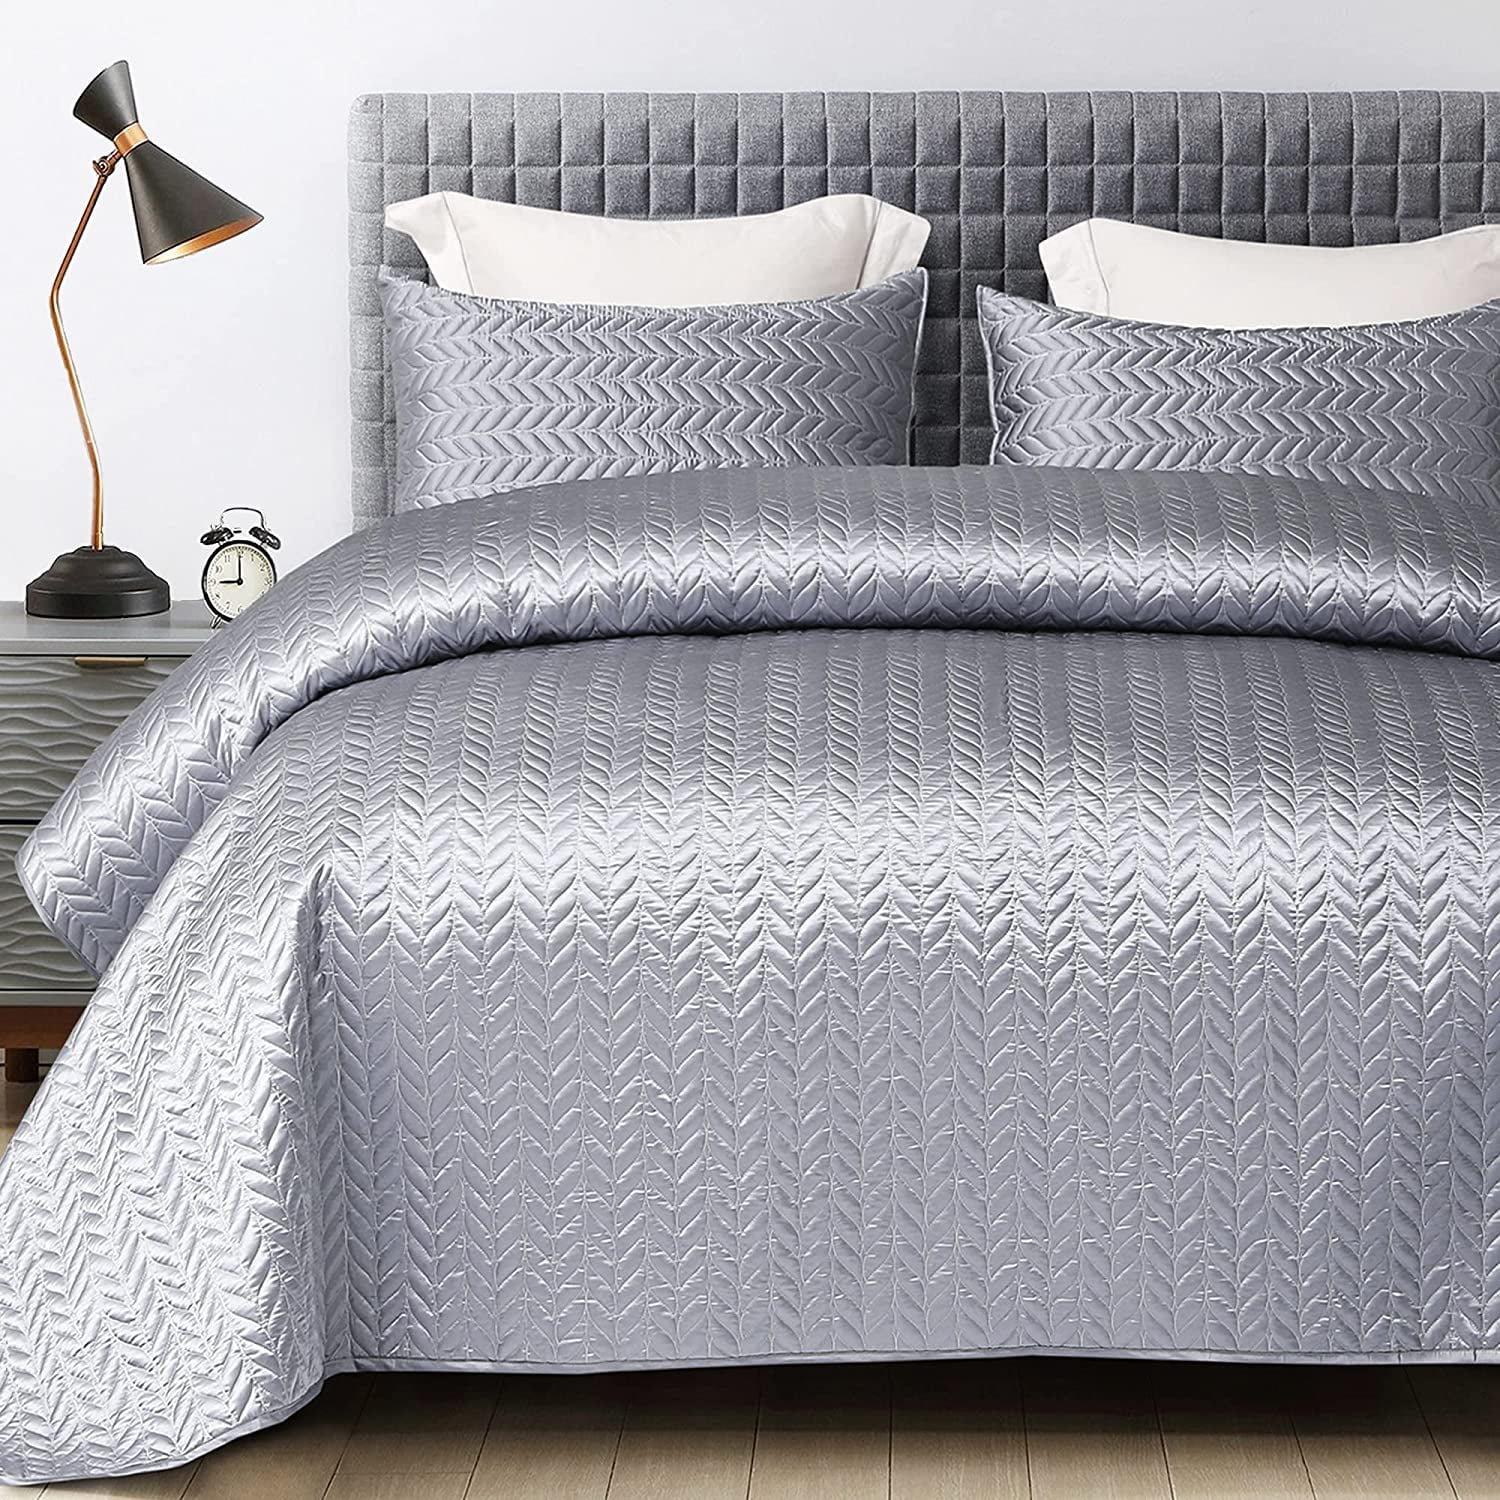 Luxury Grey King Size Lightweight Comforter Bedspread Set With Pillow Shams 